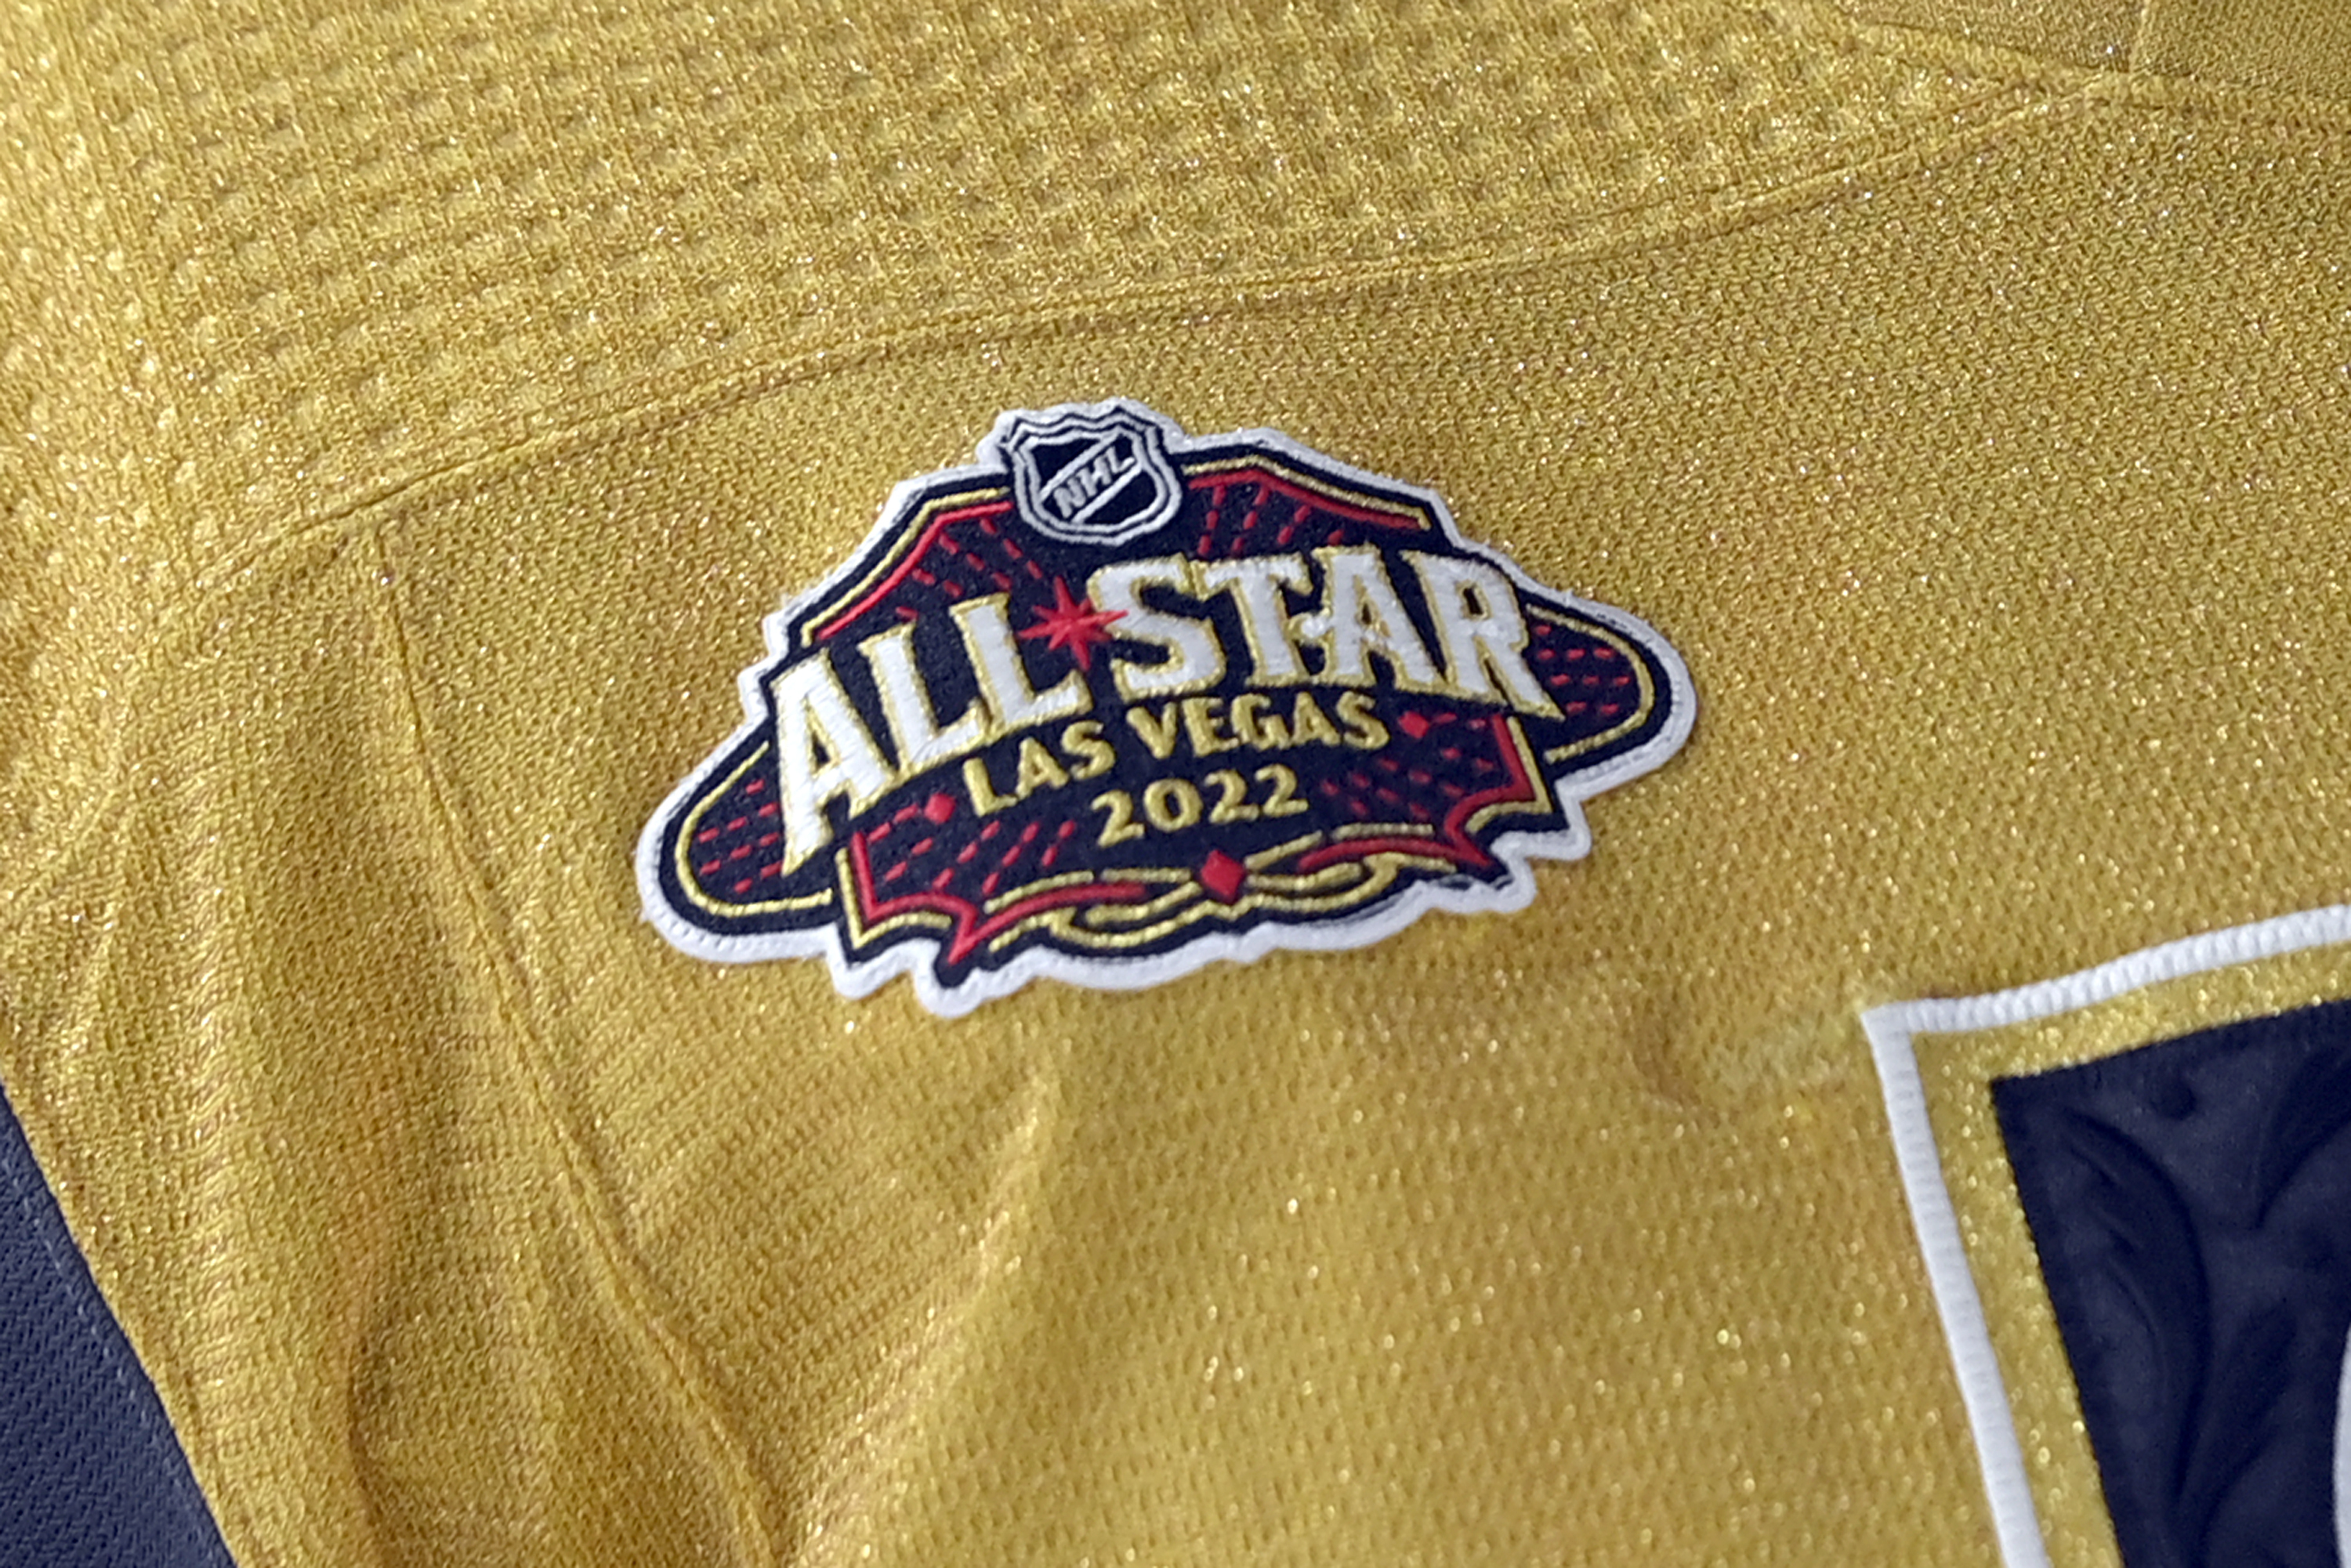 How to watch NHL All-Star Skills Competition Time, TV channel, FREE live stream